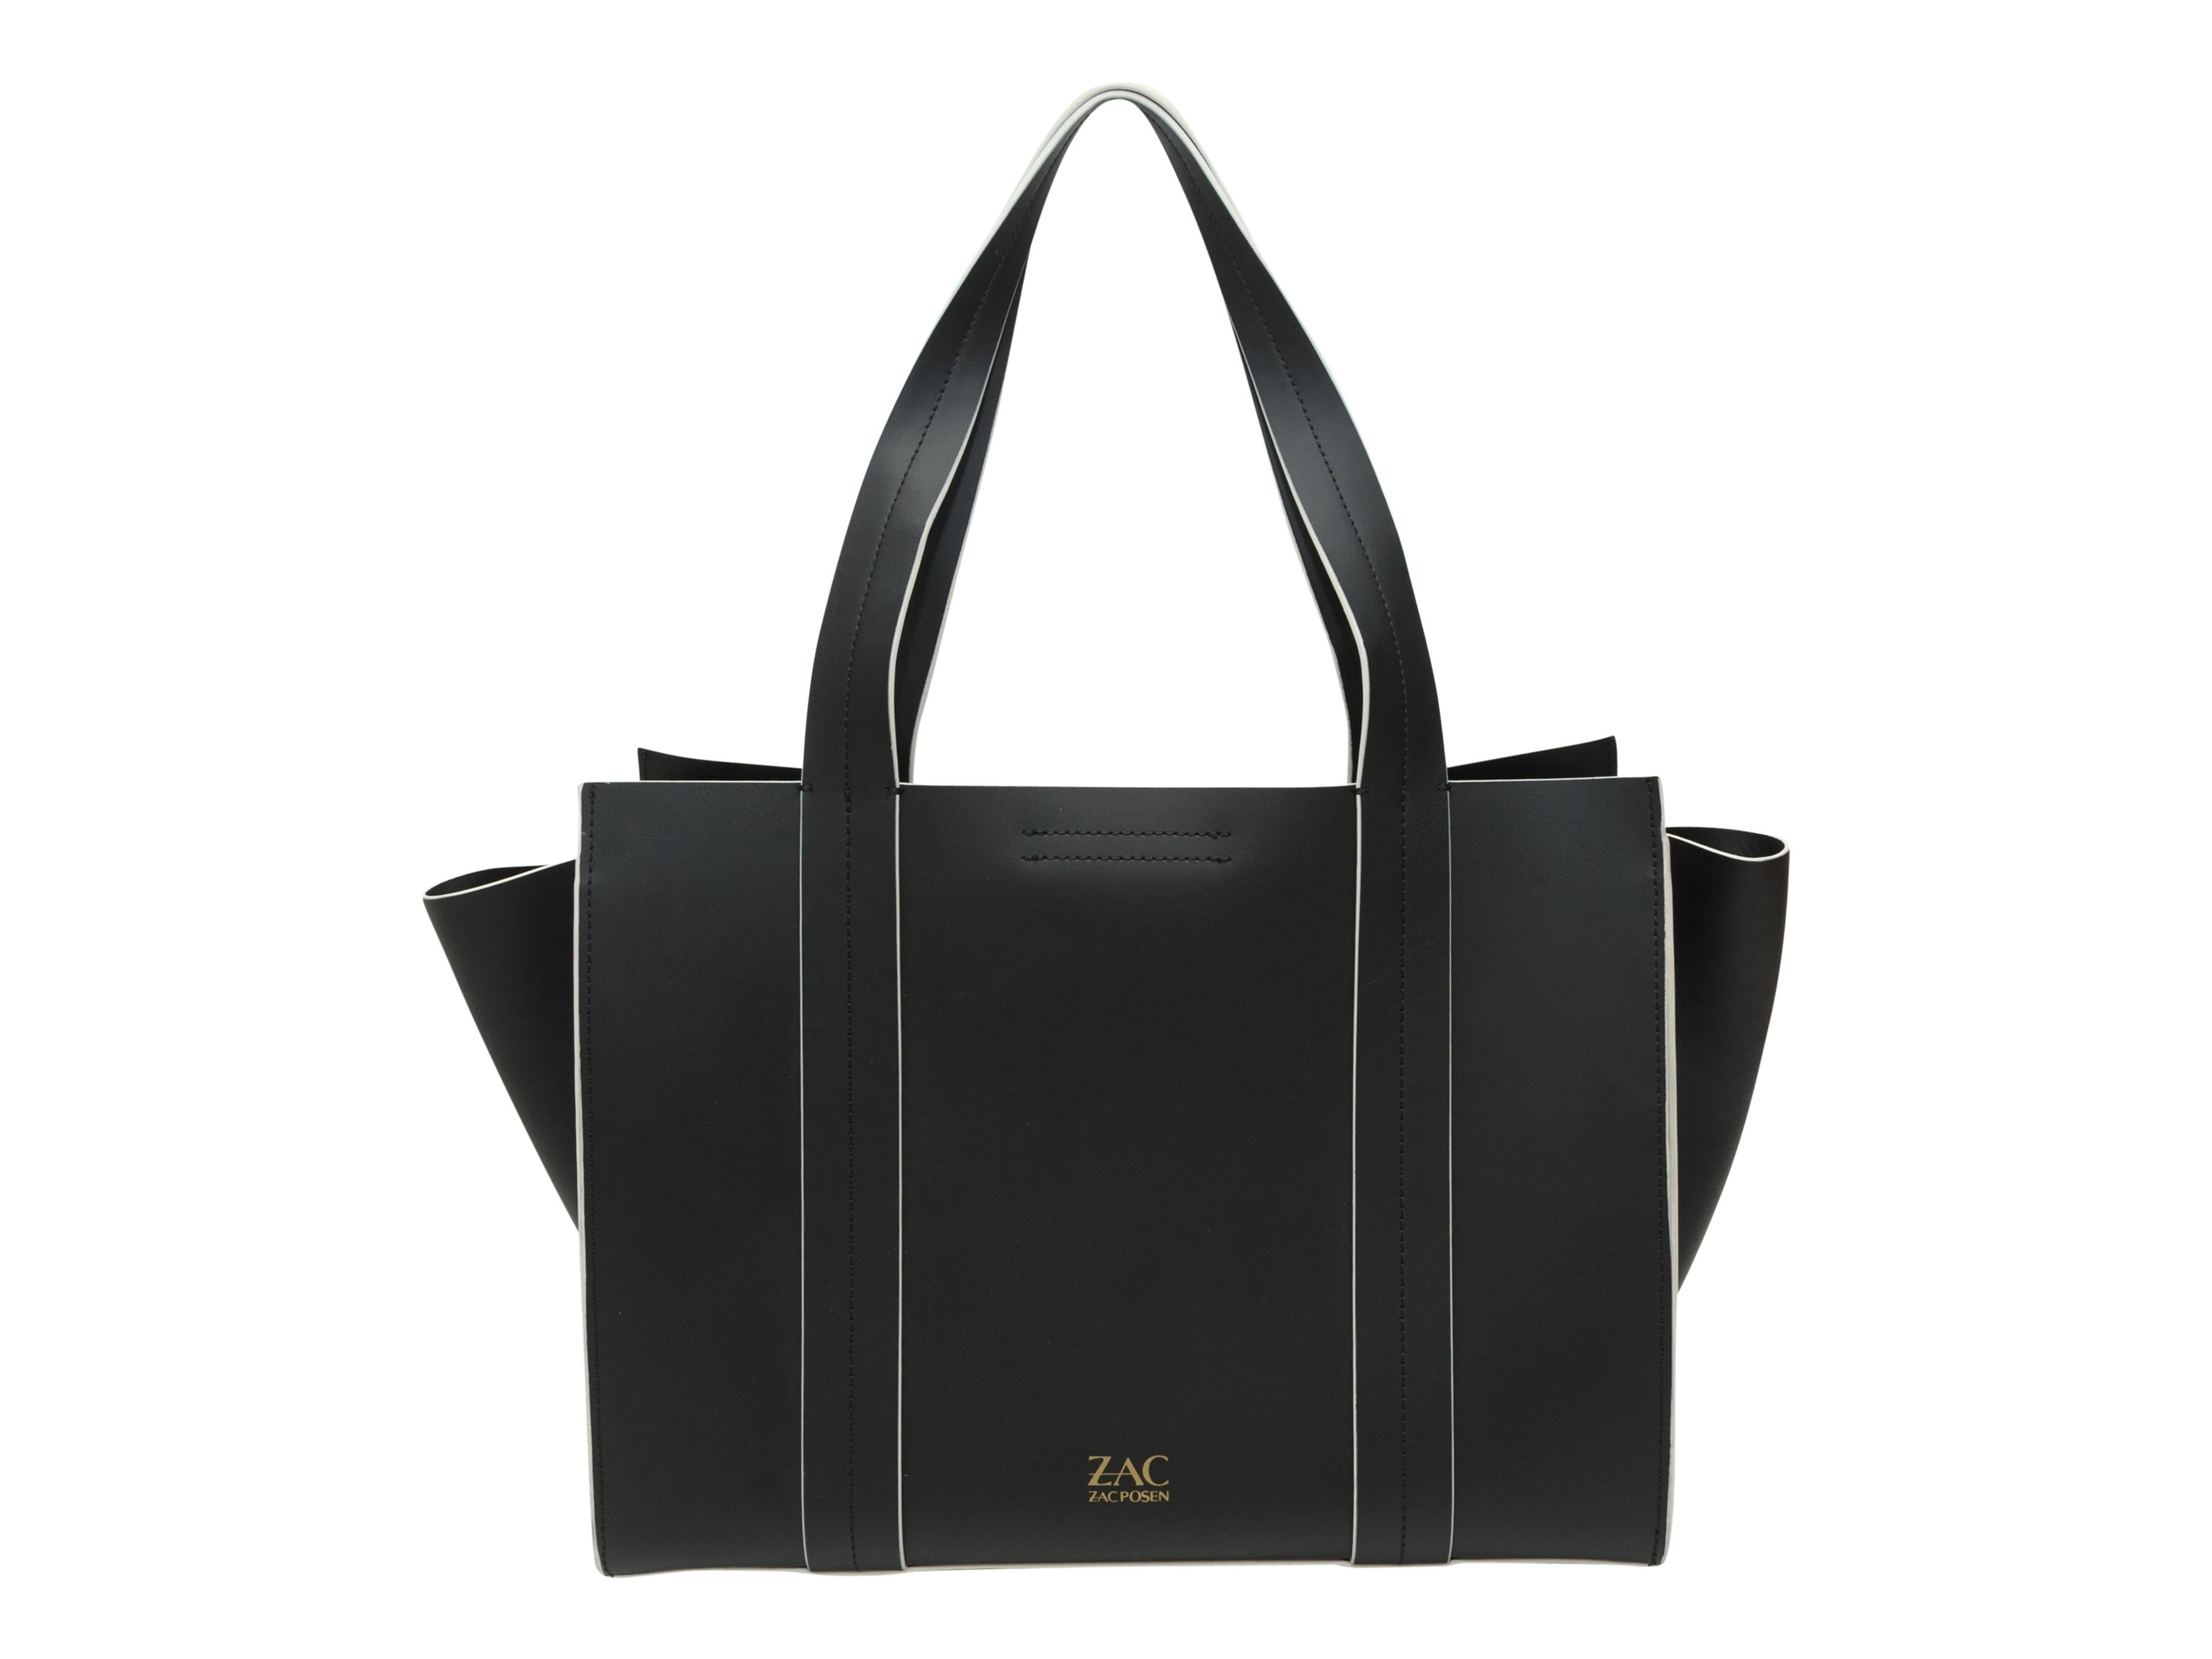 Product details: Black leather handbag by Zac Posen. White trim throughout. Gold-tone hardware. Closure at front. 14